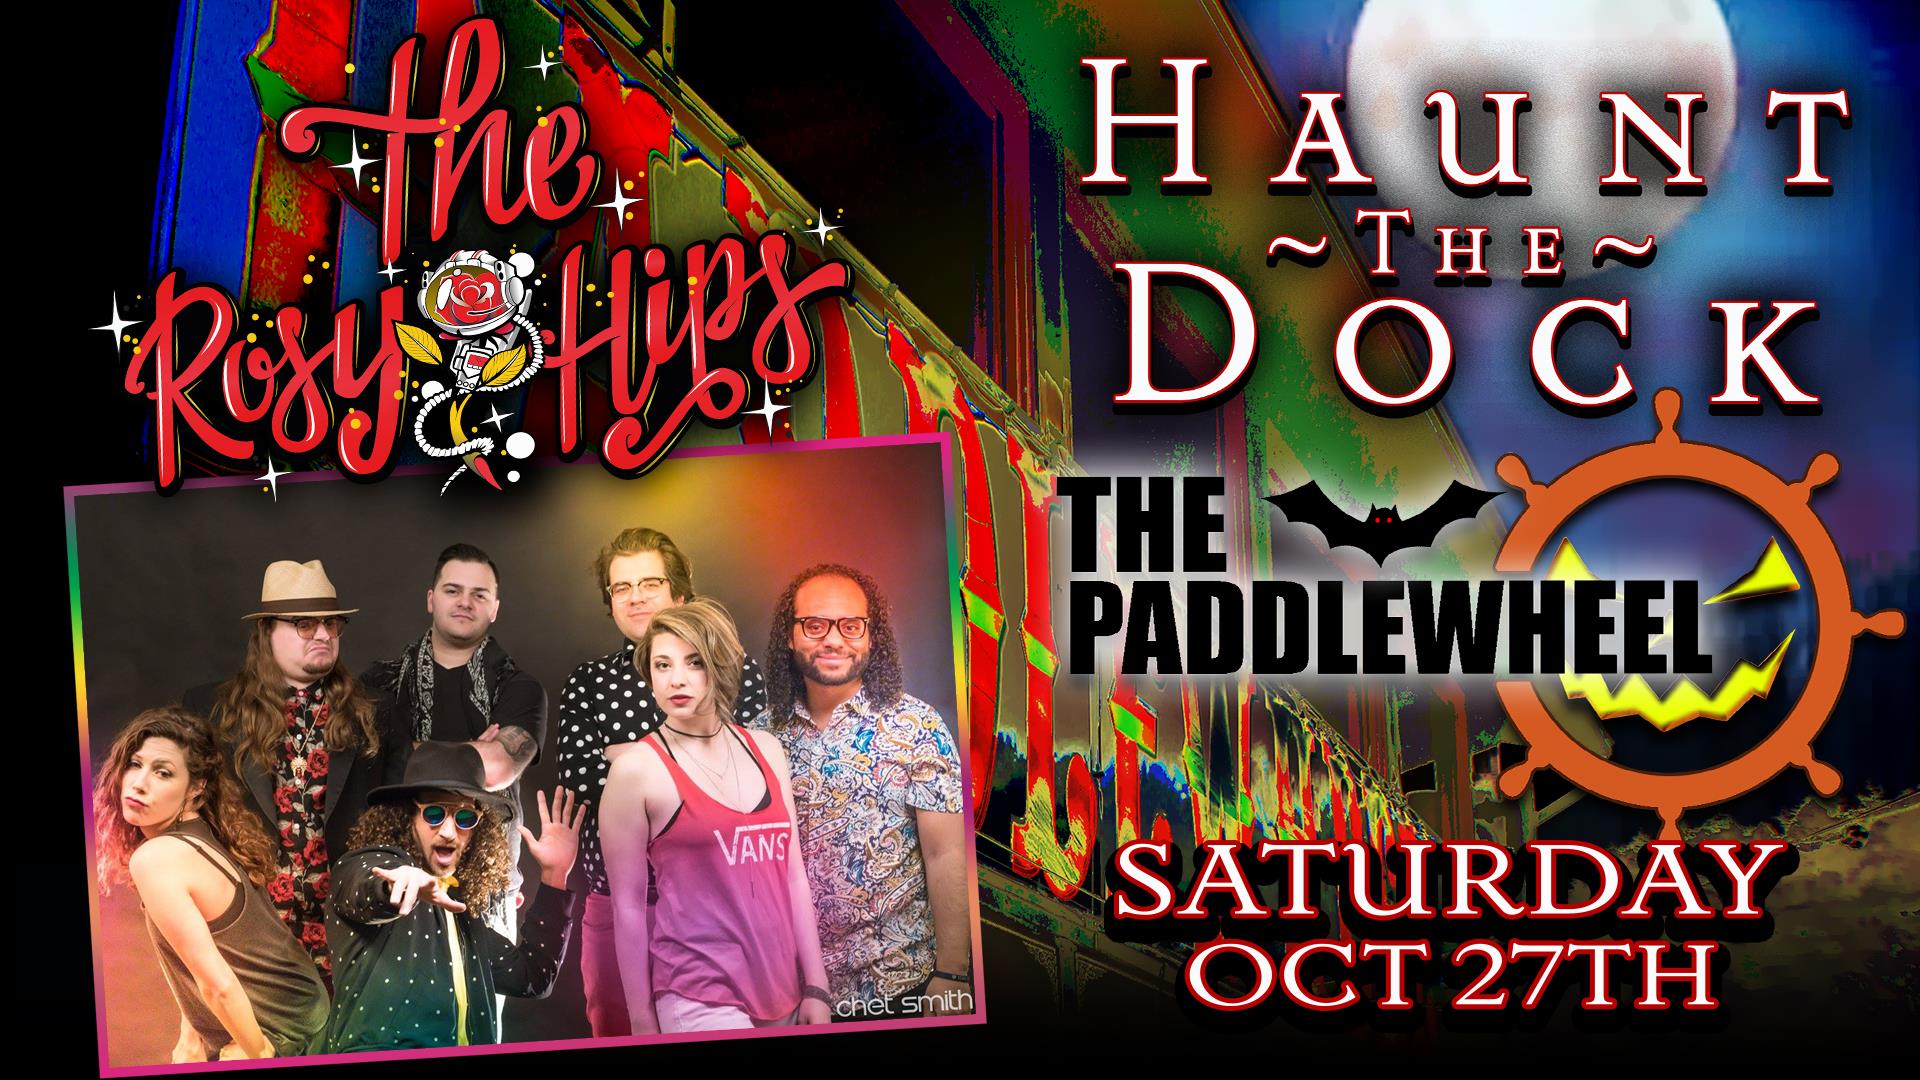 The Rosy Hips for our Halloween Party at the Paddlewheel